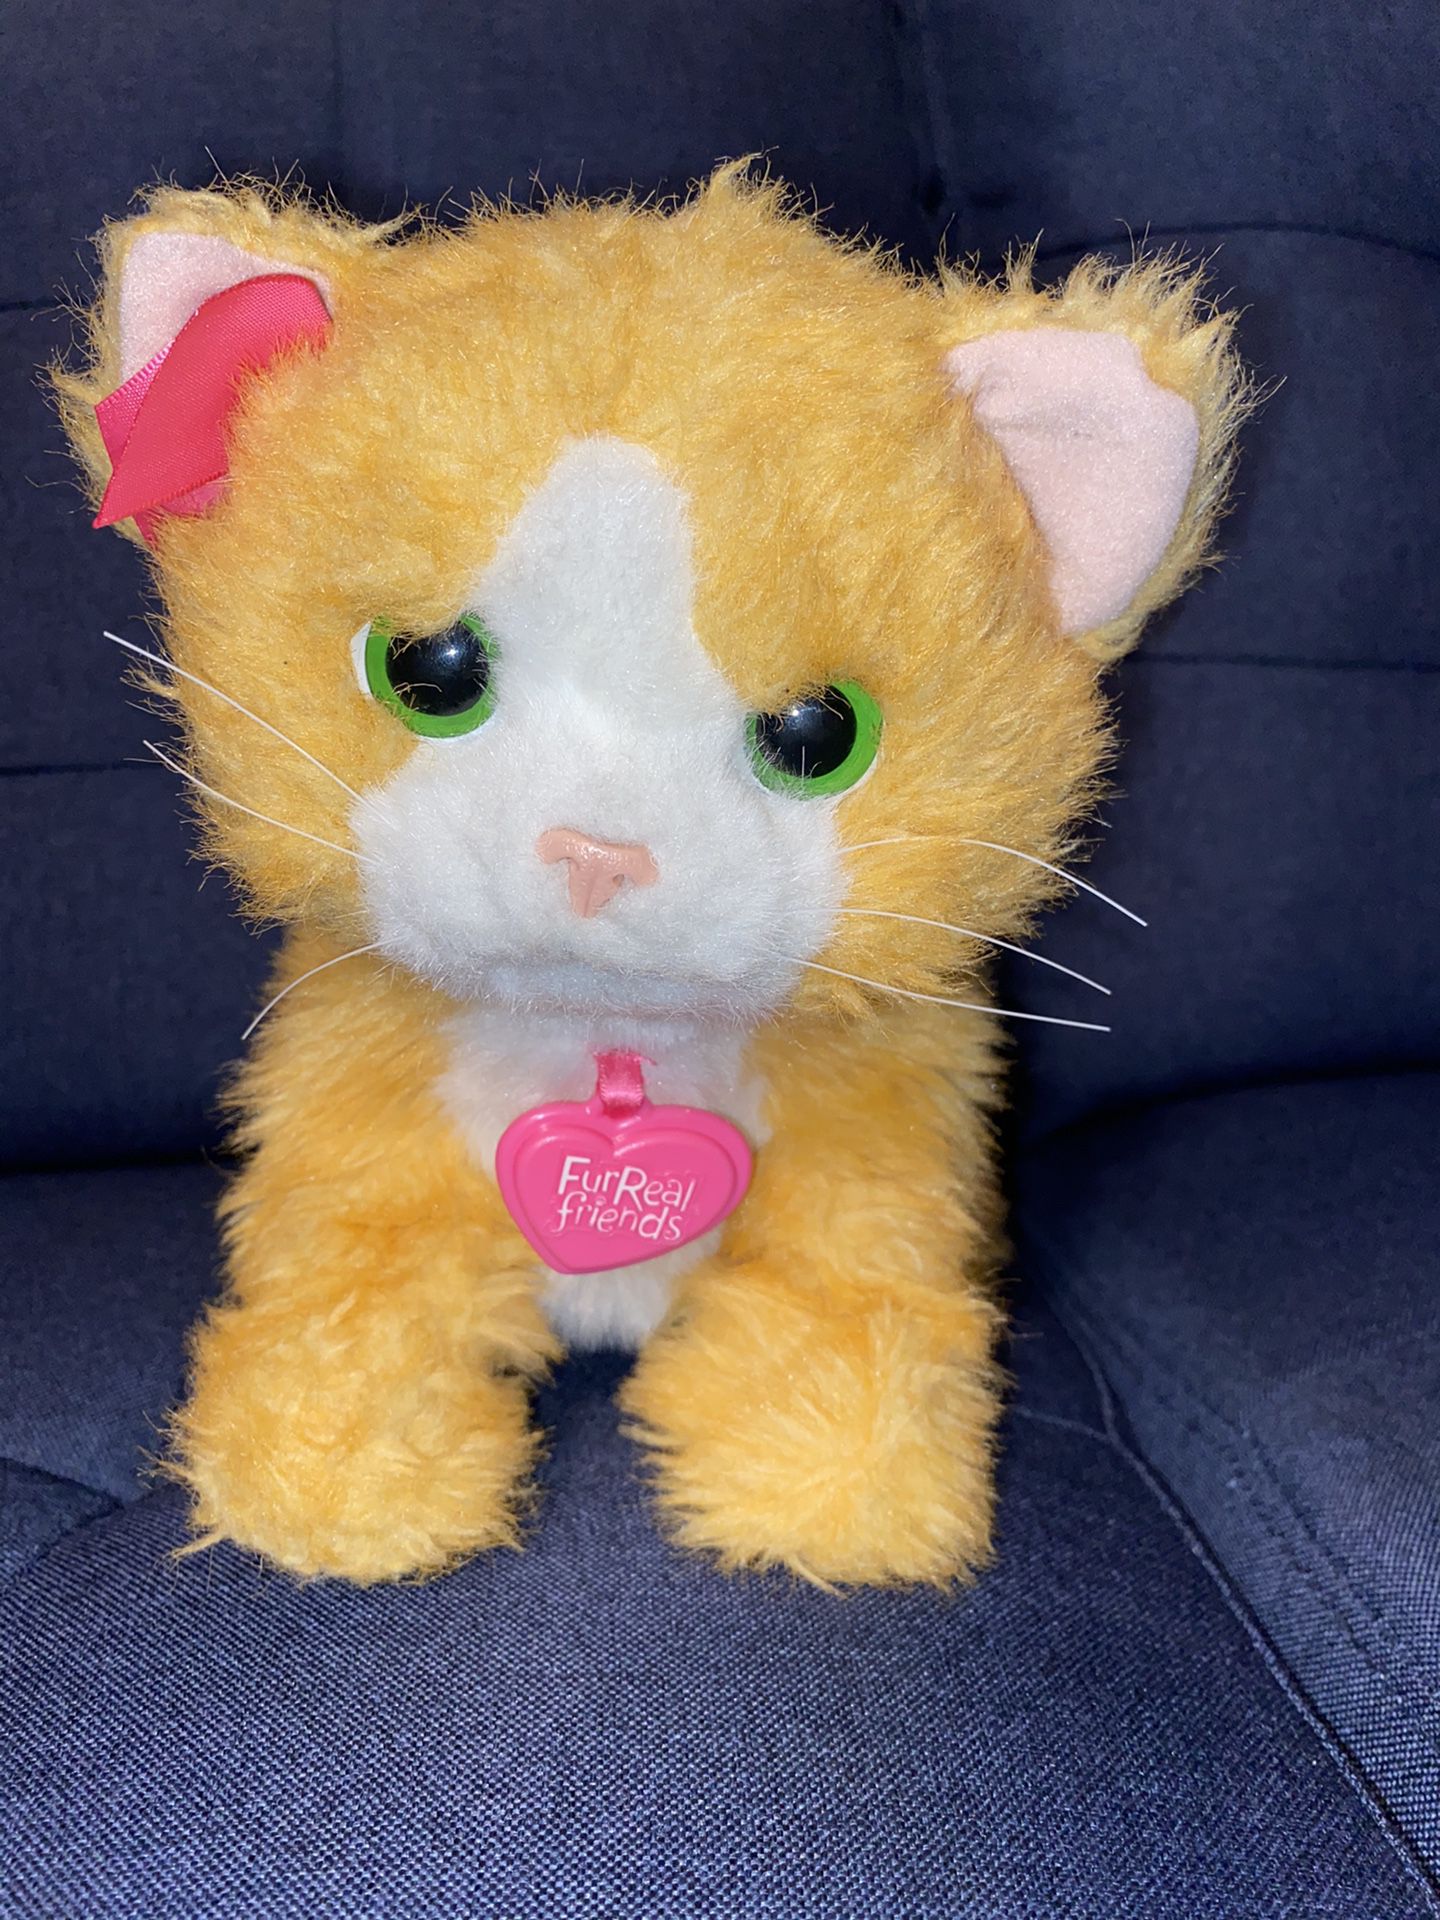 Hasbro Fur Real Friends Interactive Plush 13" Ginger Kitty Cat 2012 Works Great